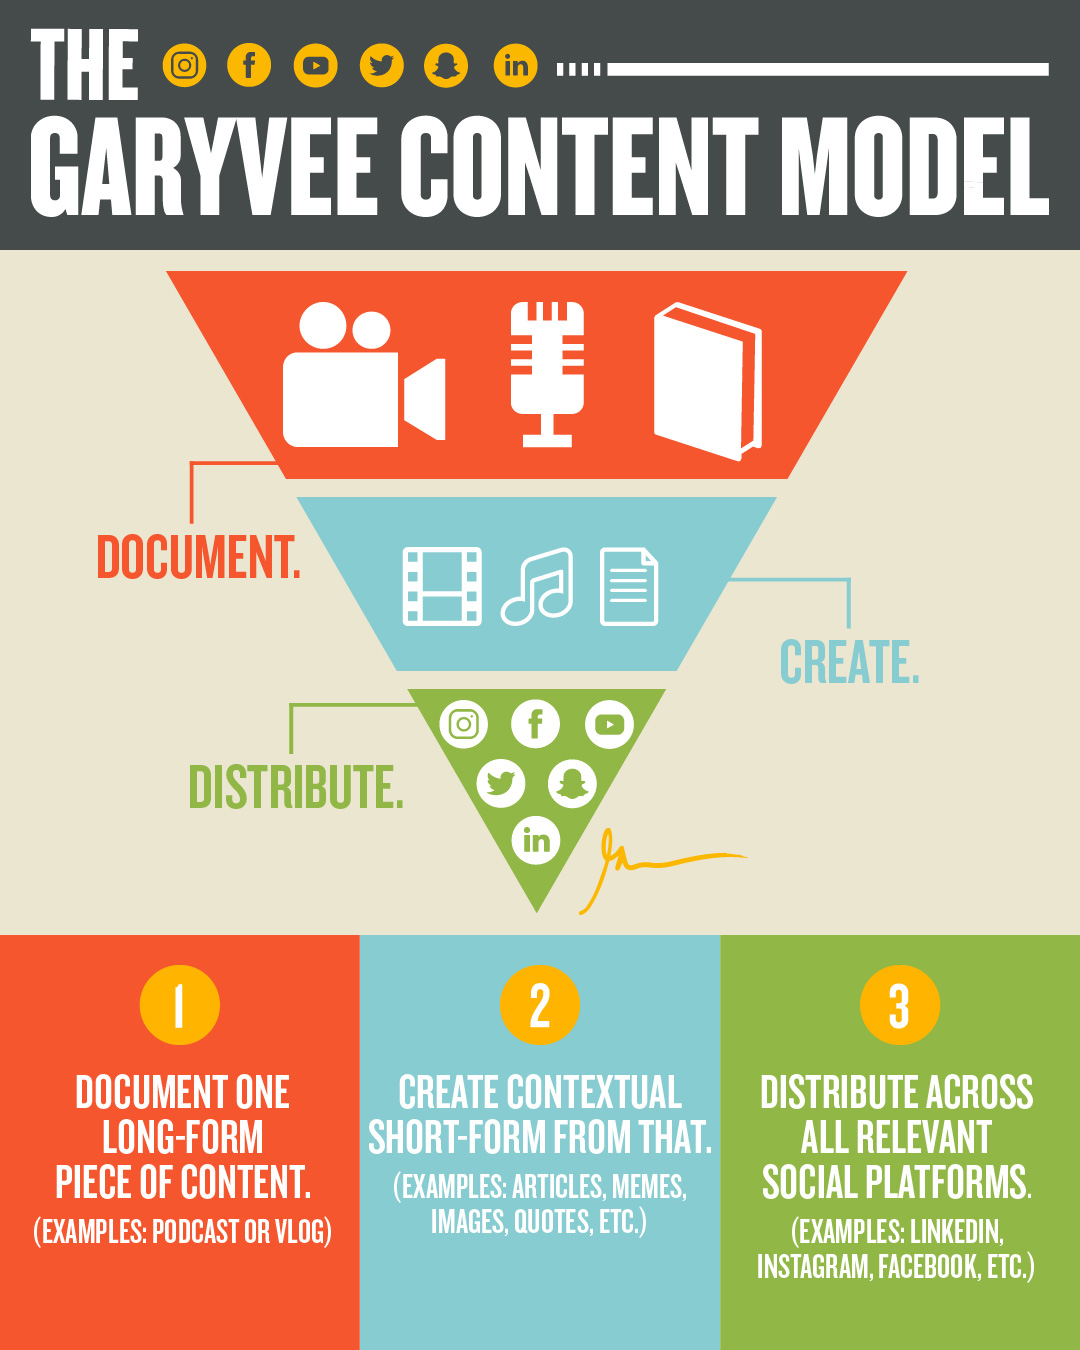 Gary Vee's content model aka  "content sprouting" formulas 